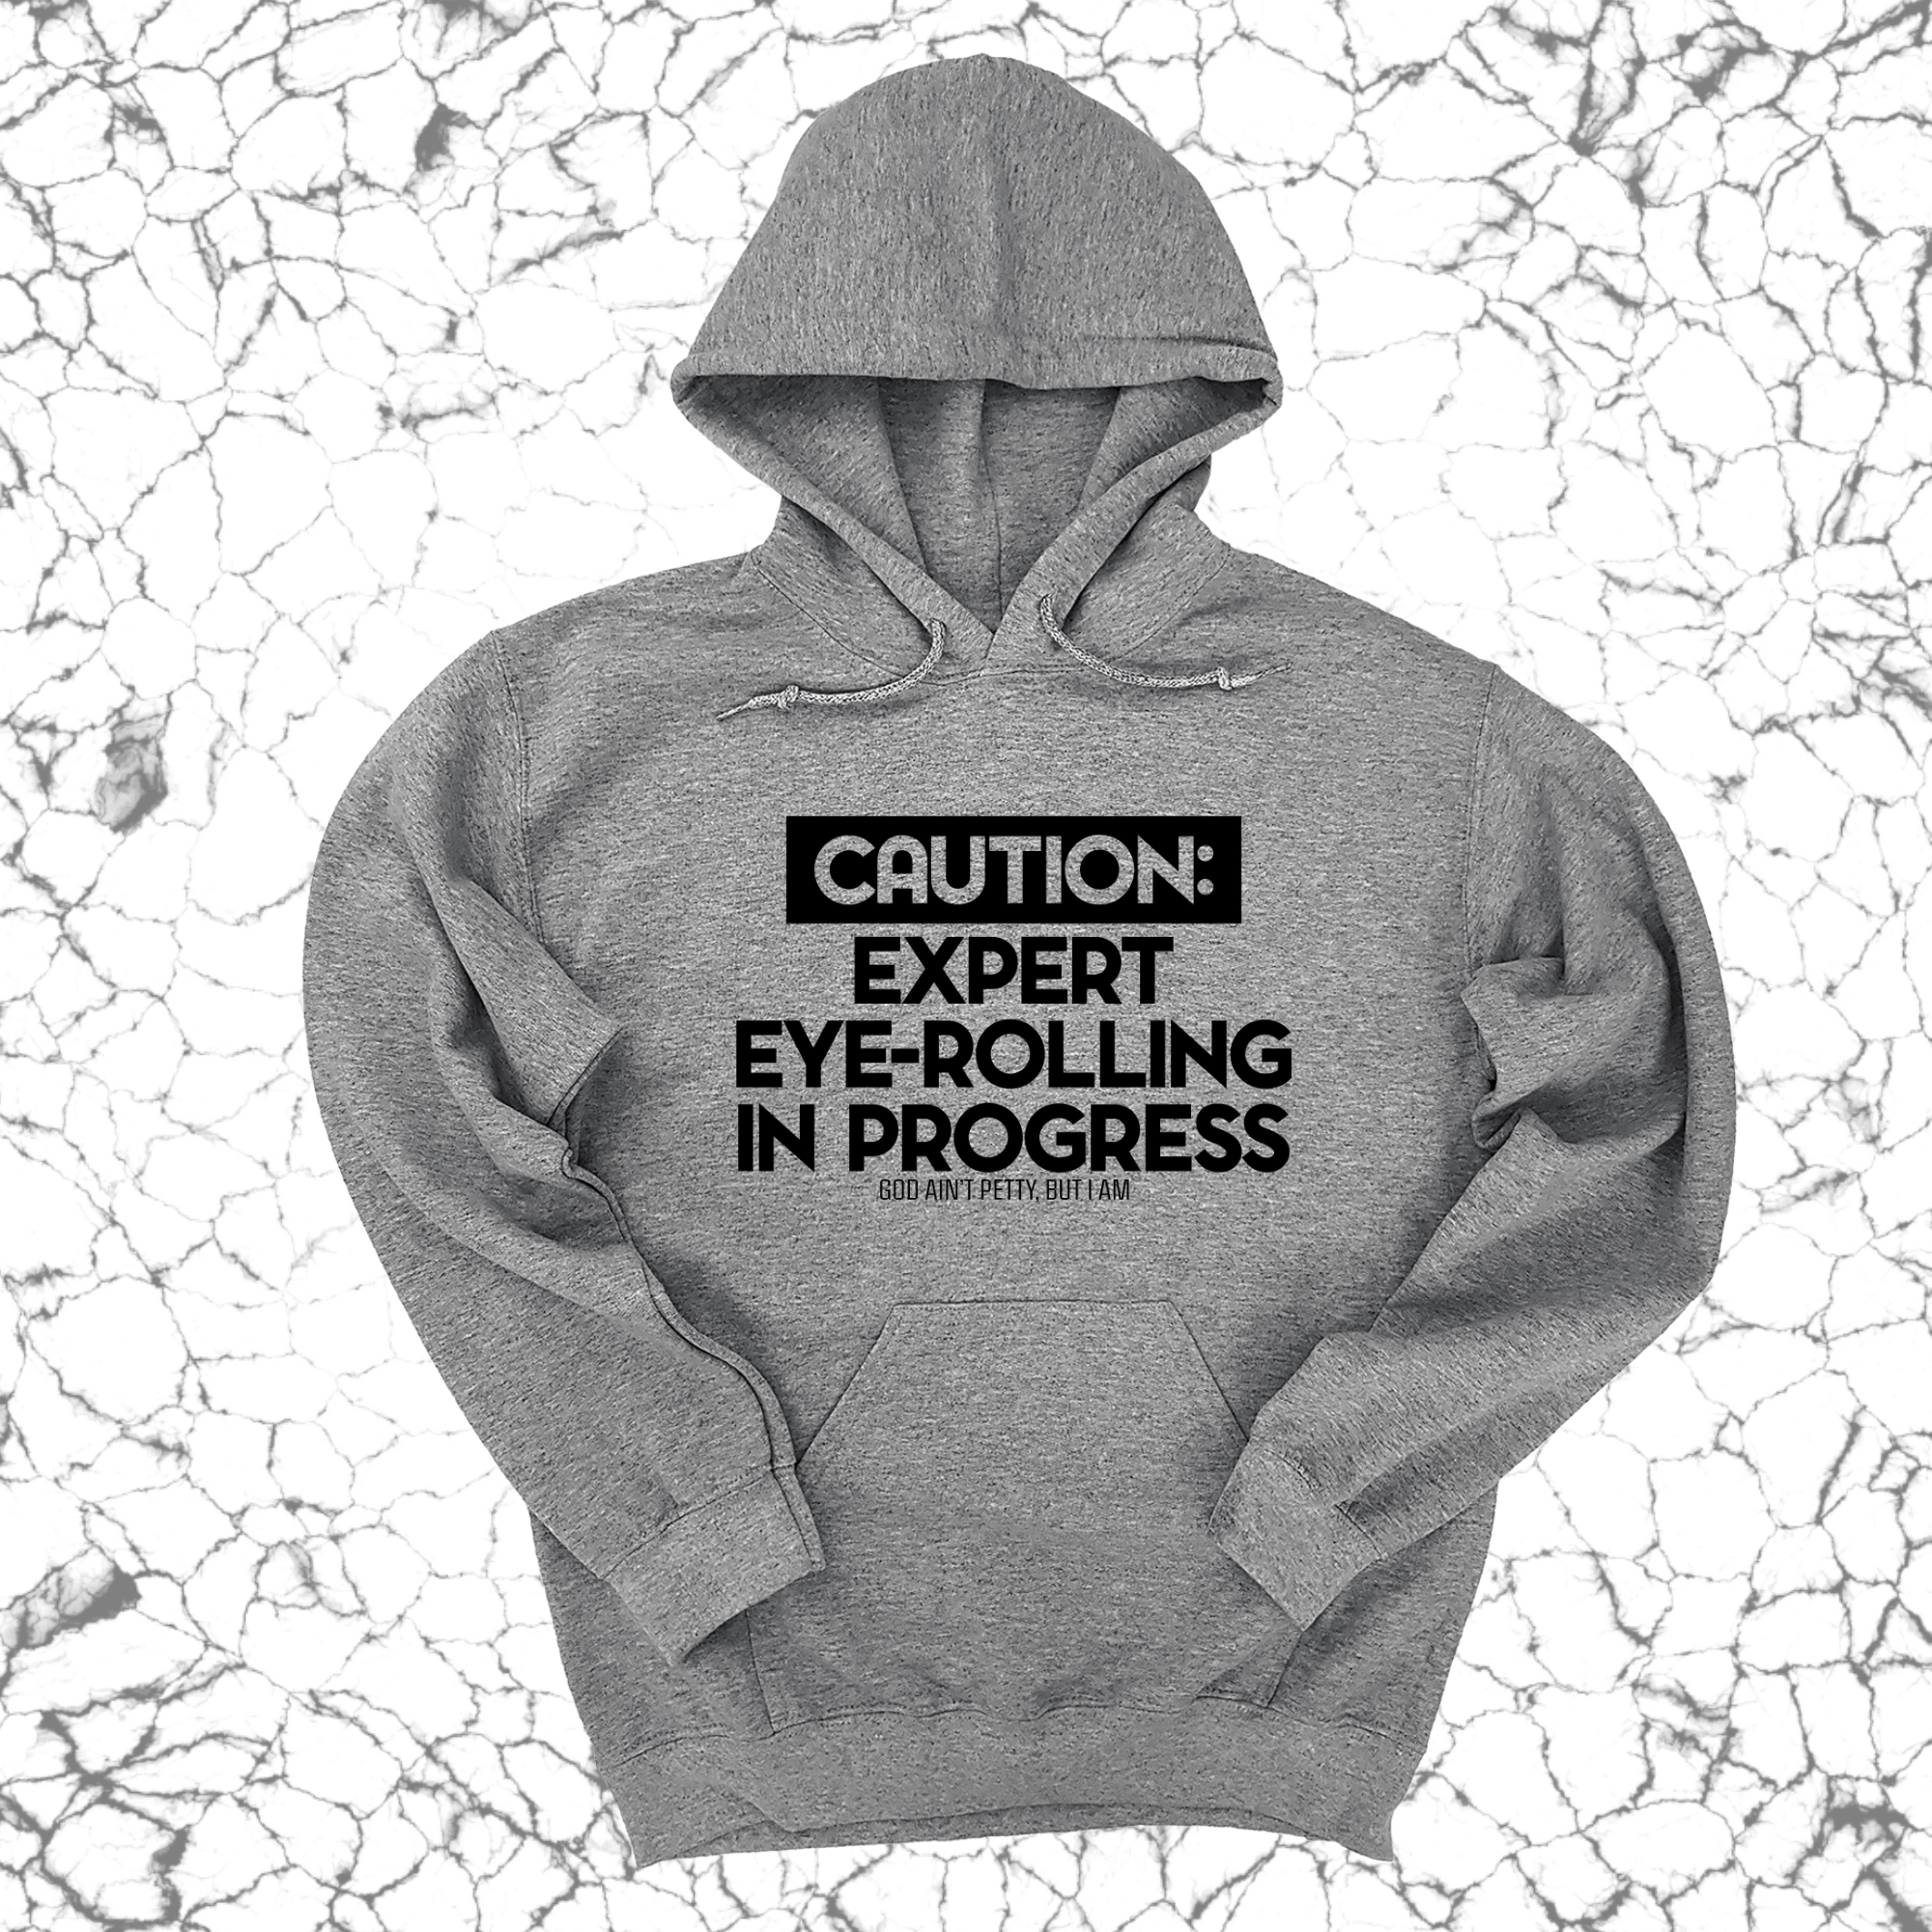 Caution Expert eye-rolling in progress Unisex Hoodie-Hoodie-The Original God Ain't Petty But I Am